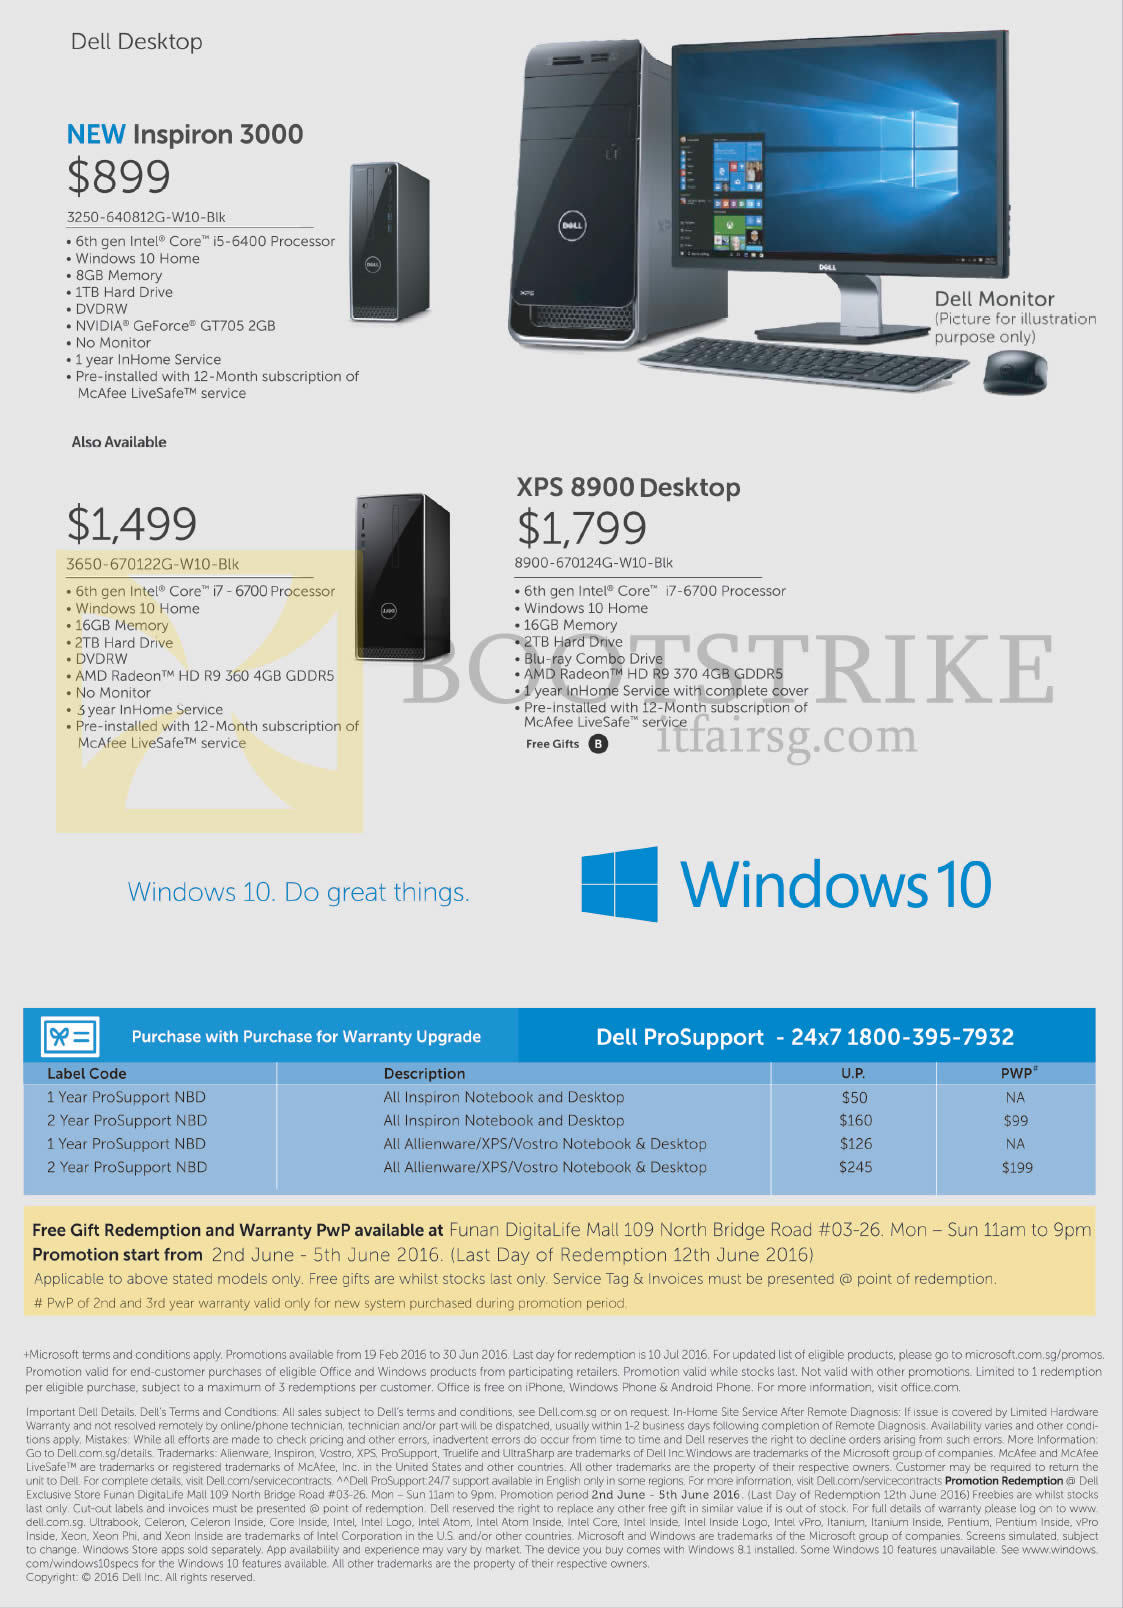 PC SHOW 2016 price list image brochure of Dell Desktop PCs Inspiron 3000, XPS 8900 Desktop, Purchase With Purchase Warranty Upgrades